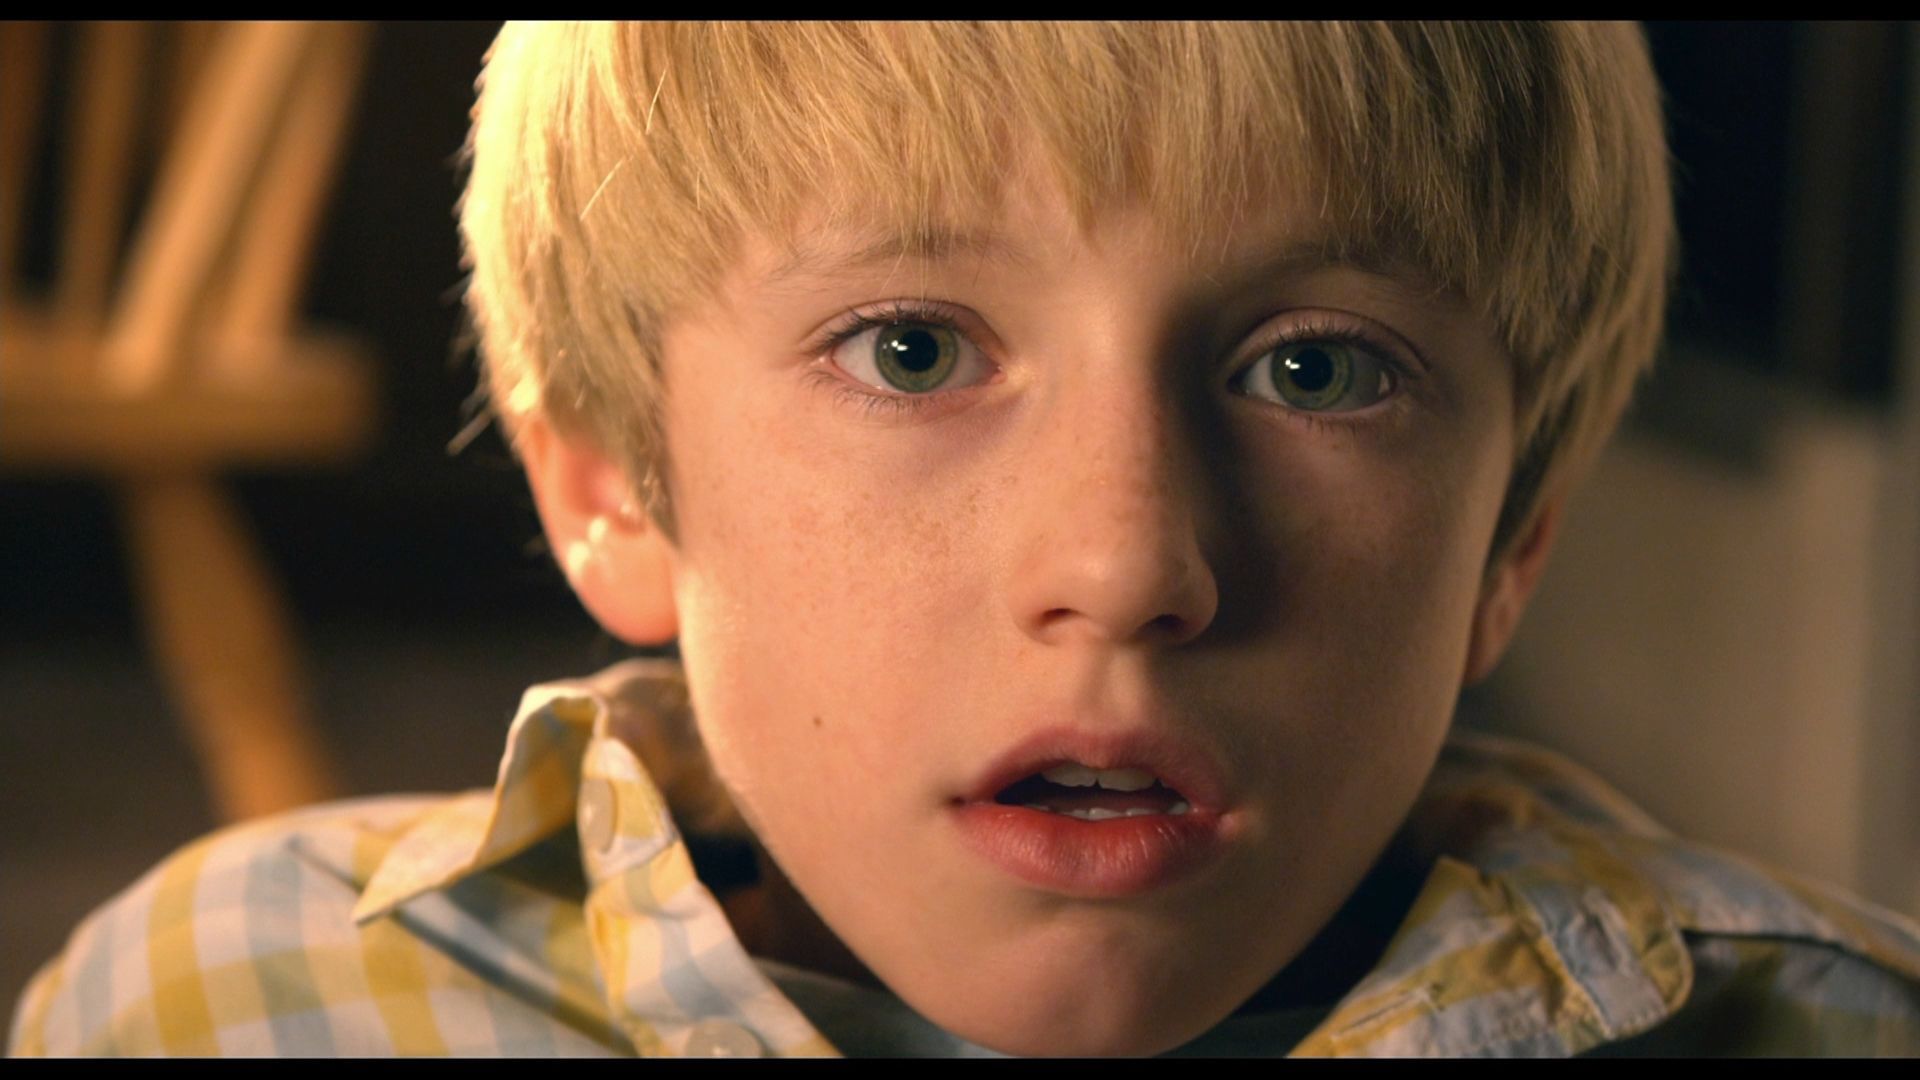 Picture of Nathan Gamble